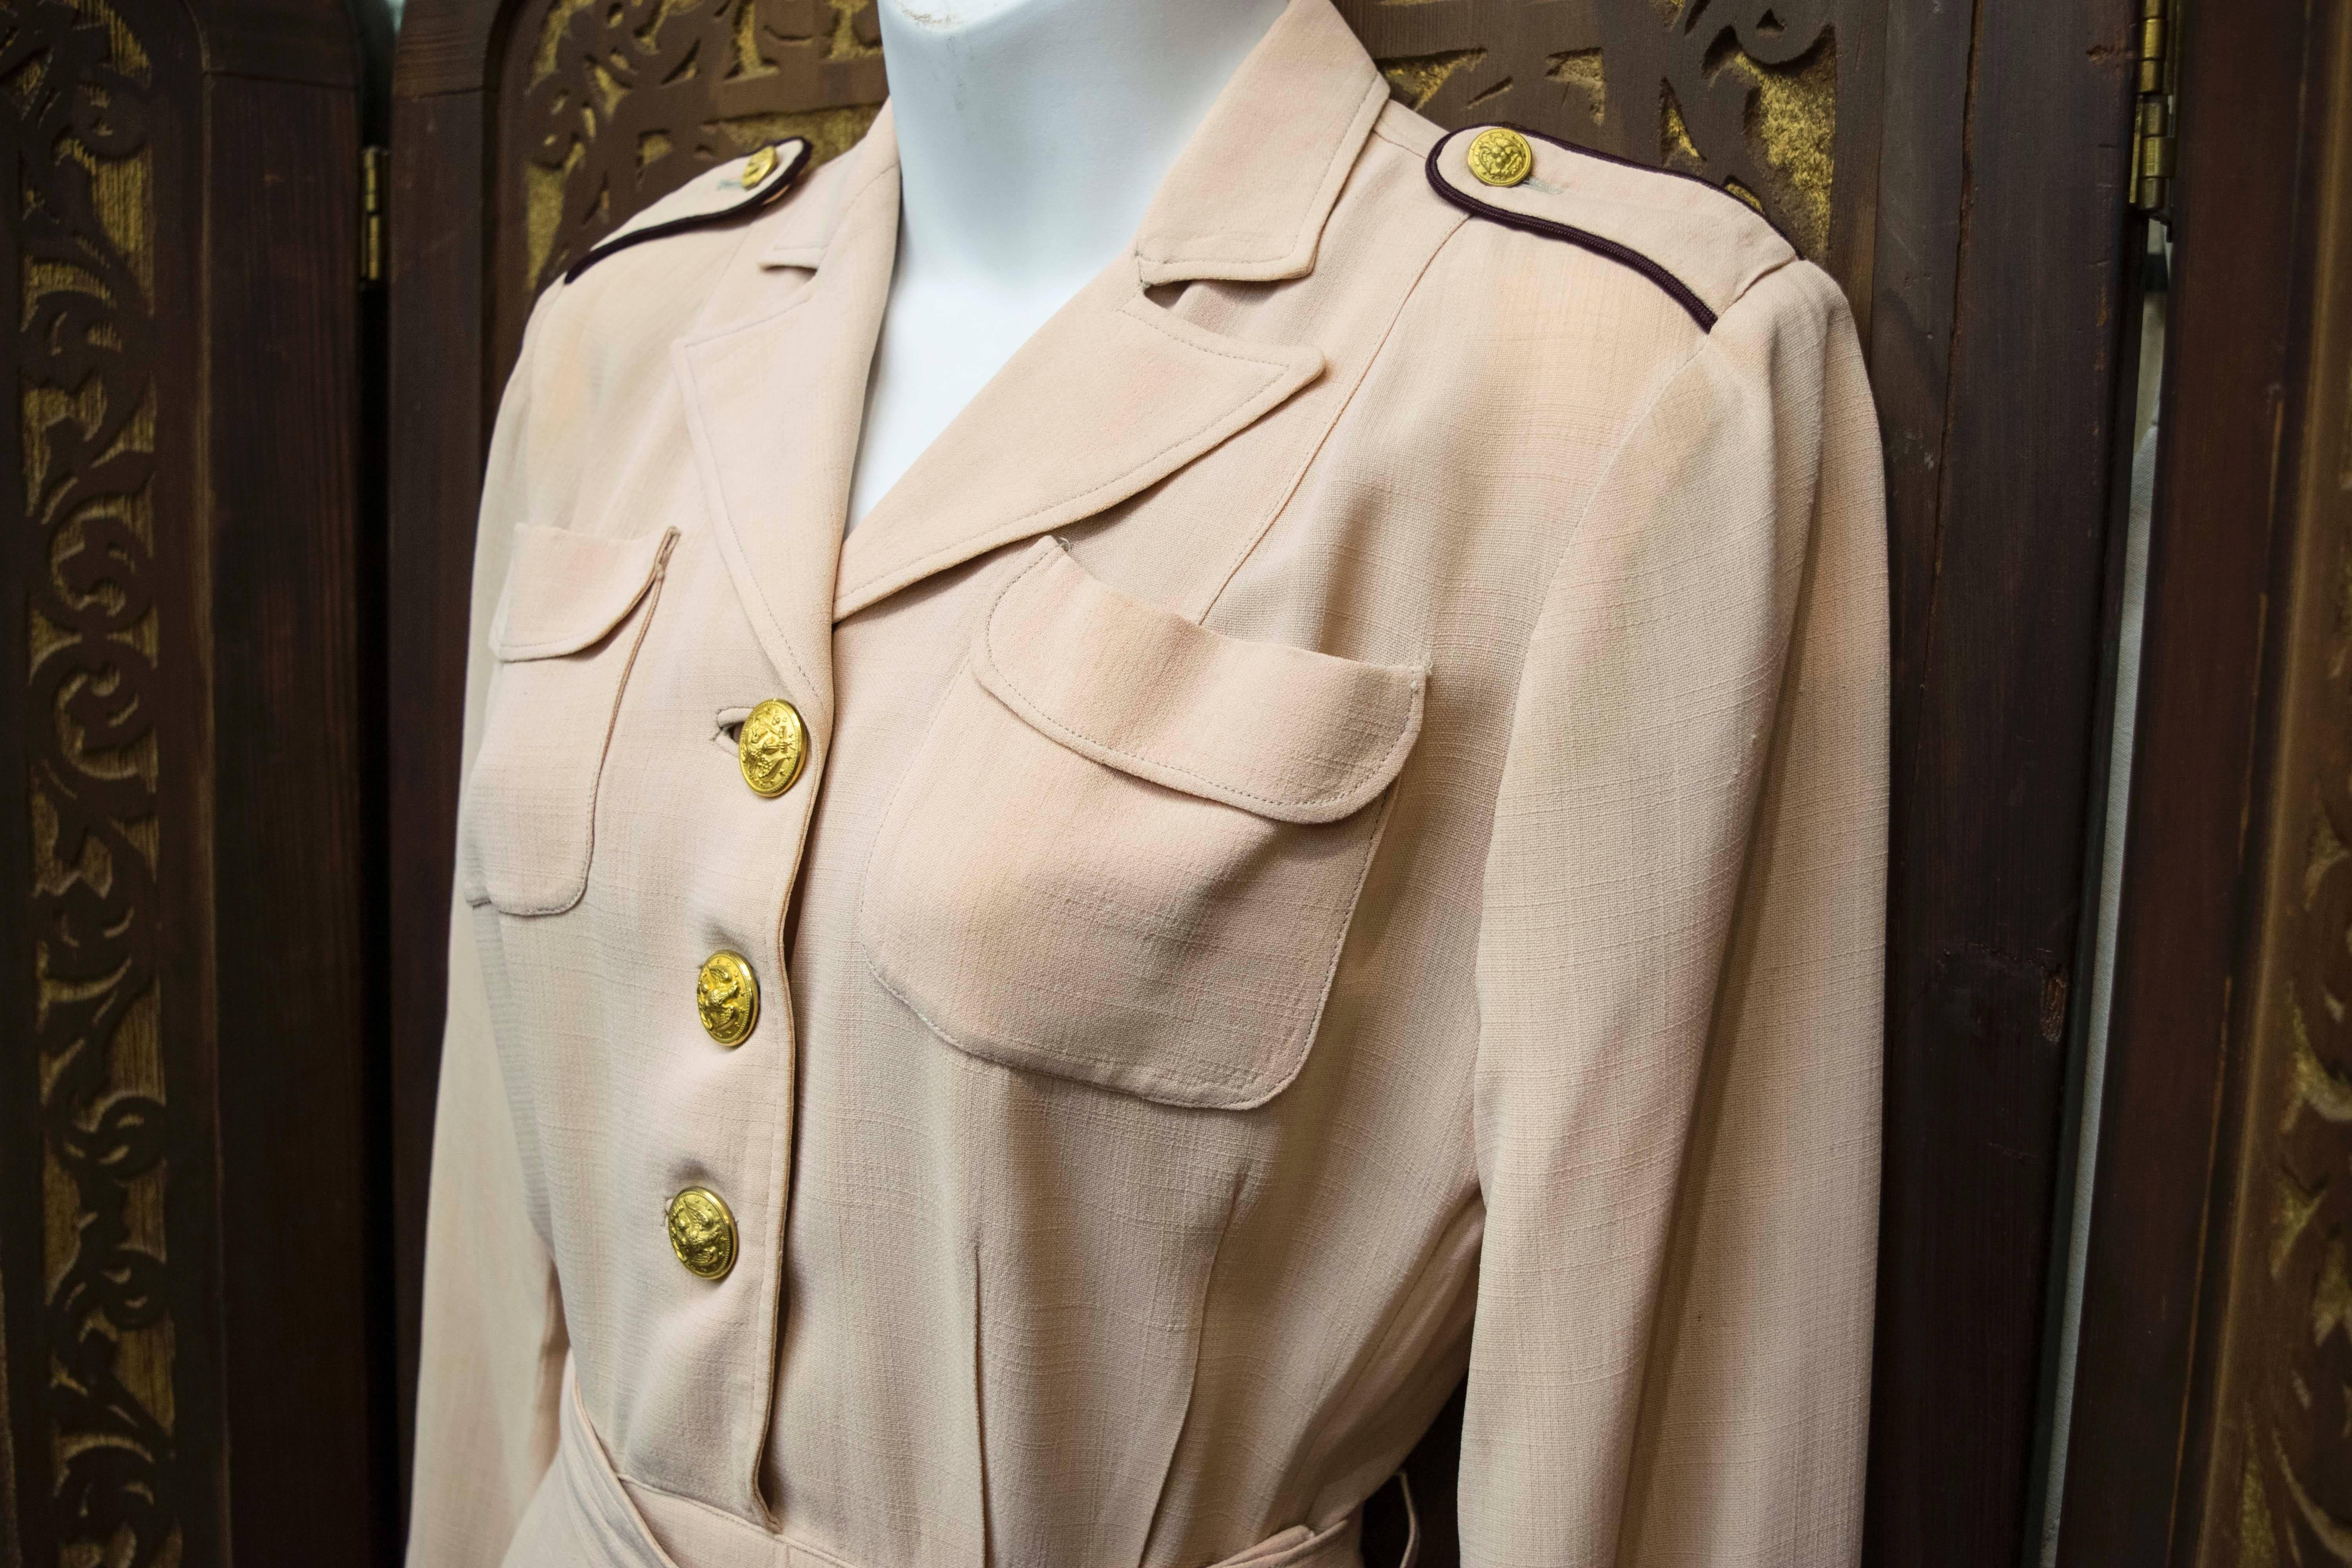 1940s US Nurses Outfit.
This stunningly chic US nurses outfit is beautifully preserved with original belt, cufflinks, epaulets, buttons and metal zipper. Made in a rose beige crepe, this piece is very reminiscent of Chanel. 
The original hem has